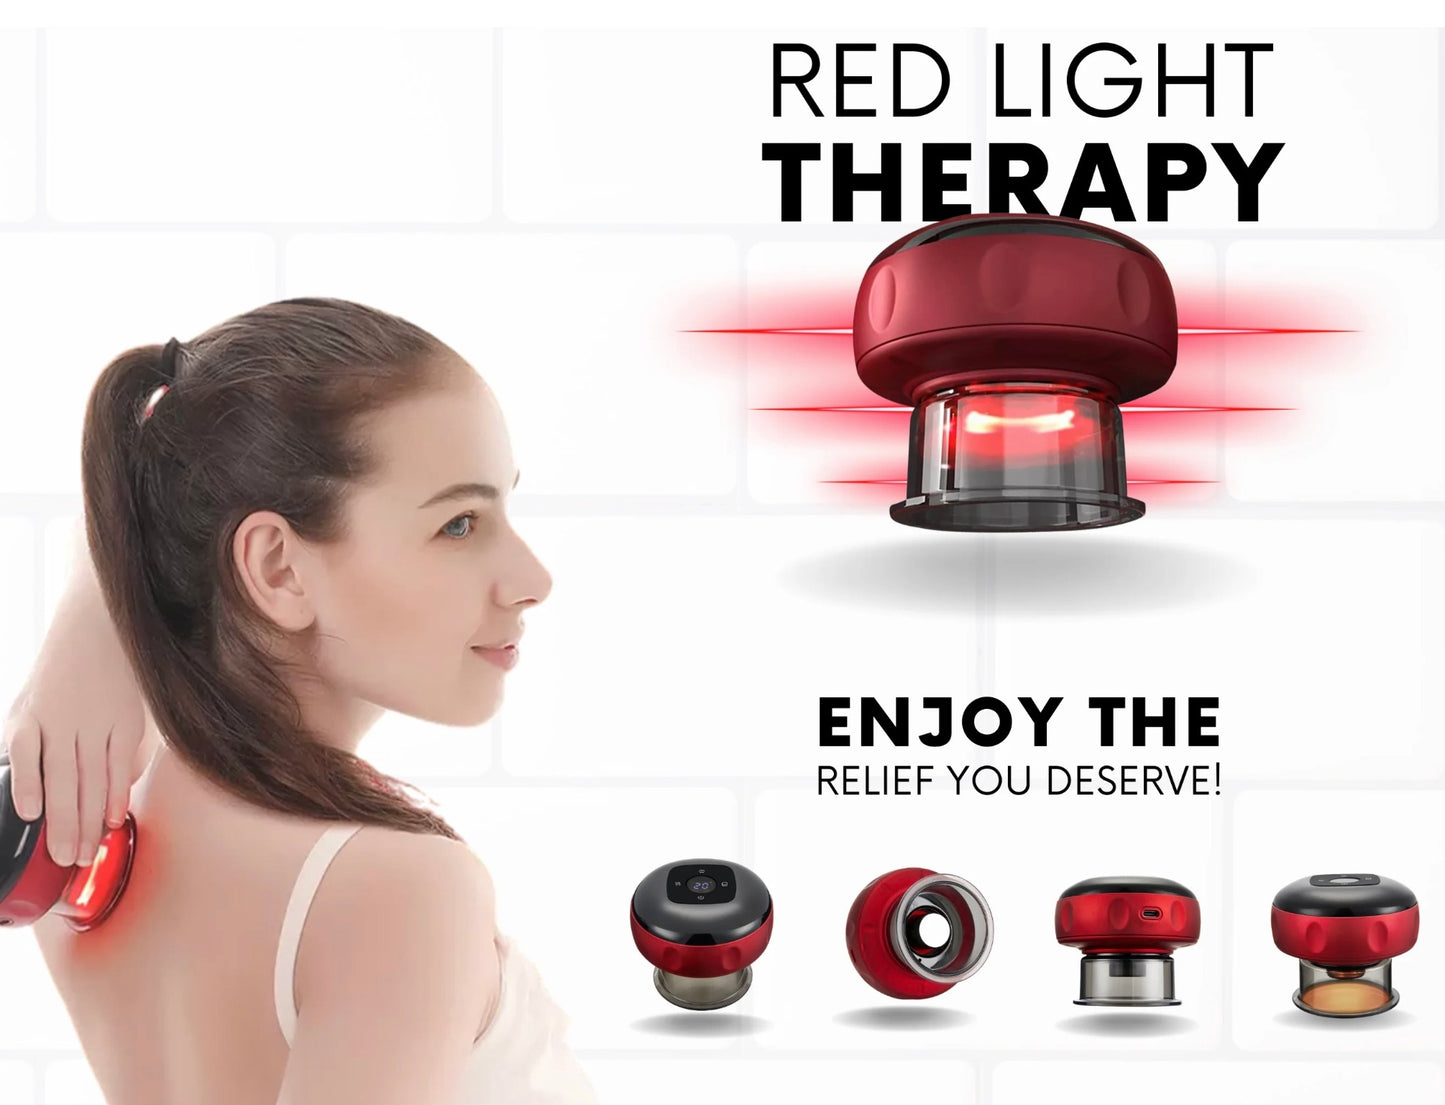 The HealFast cupping massager